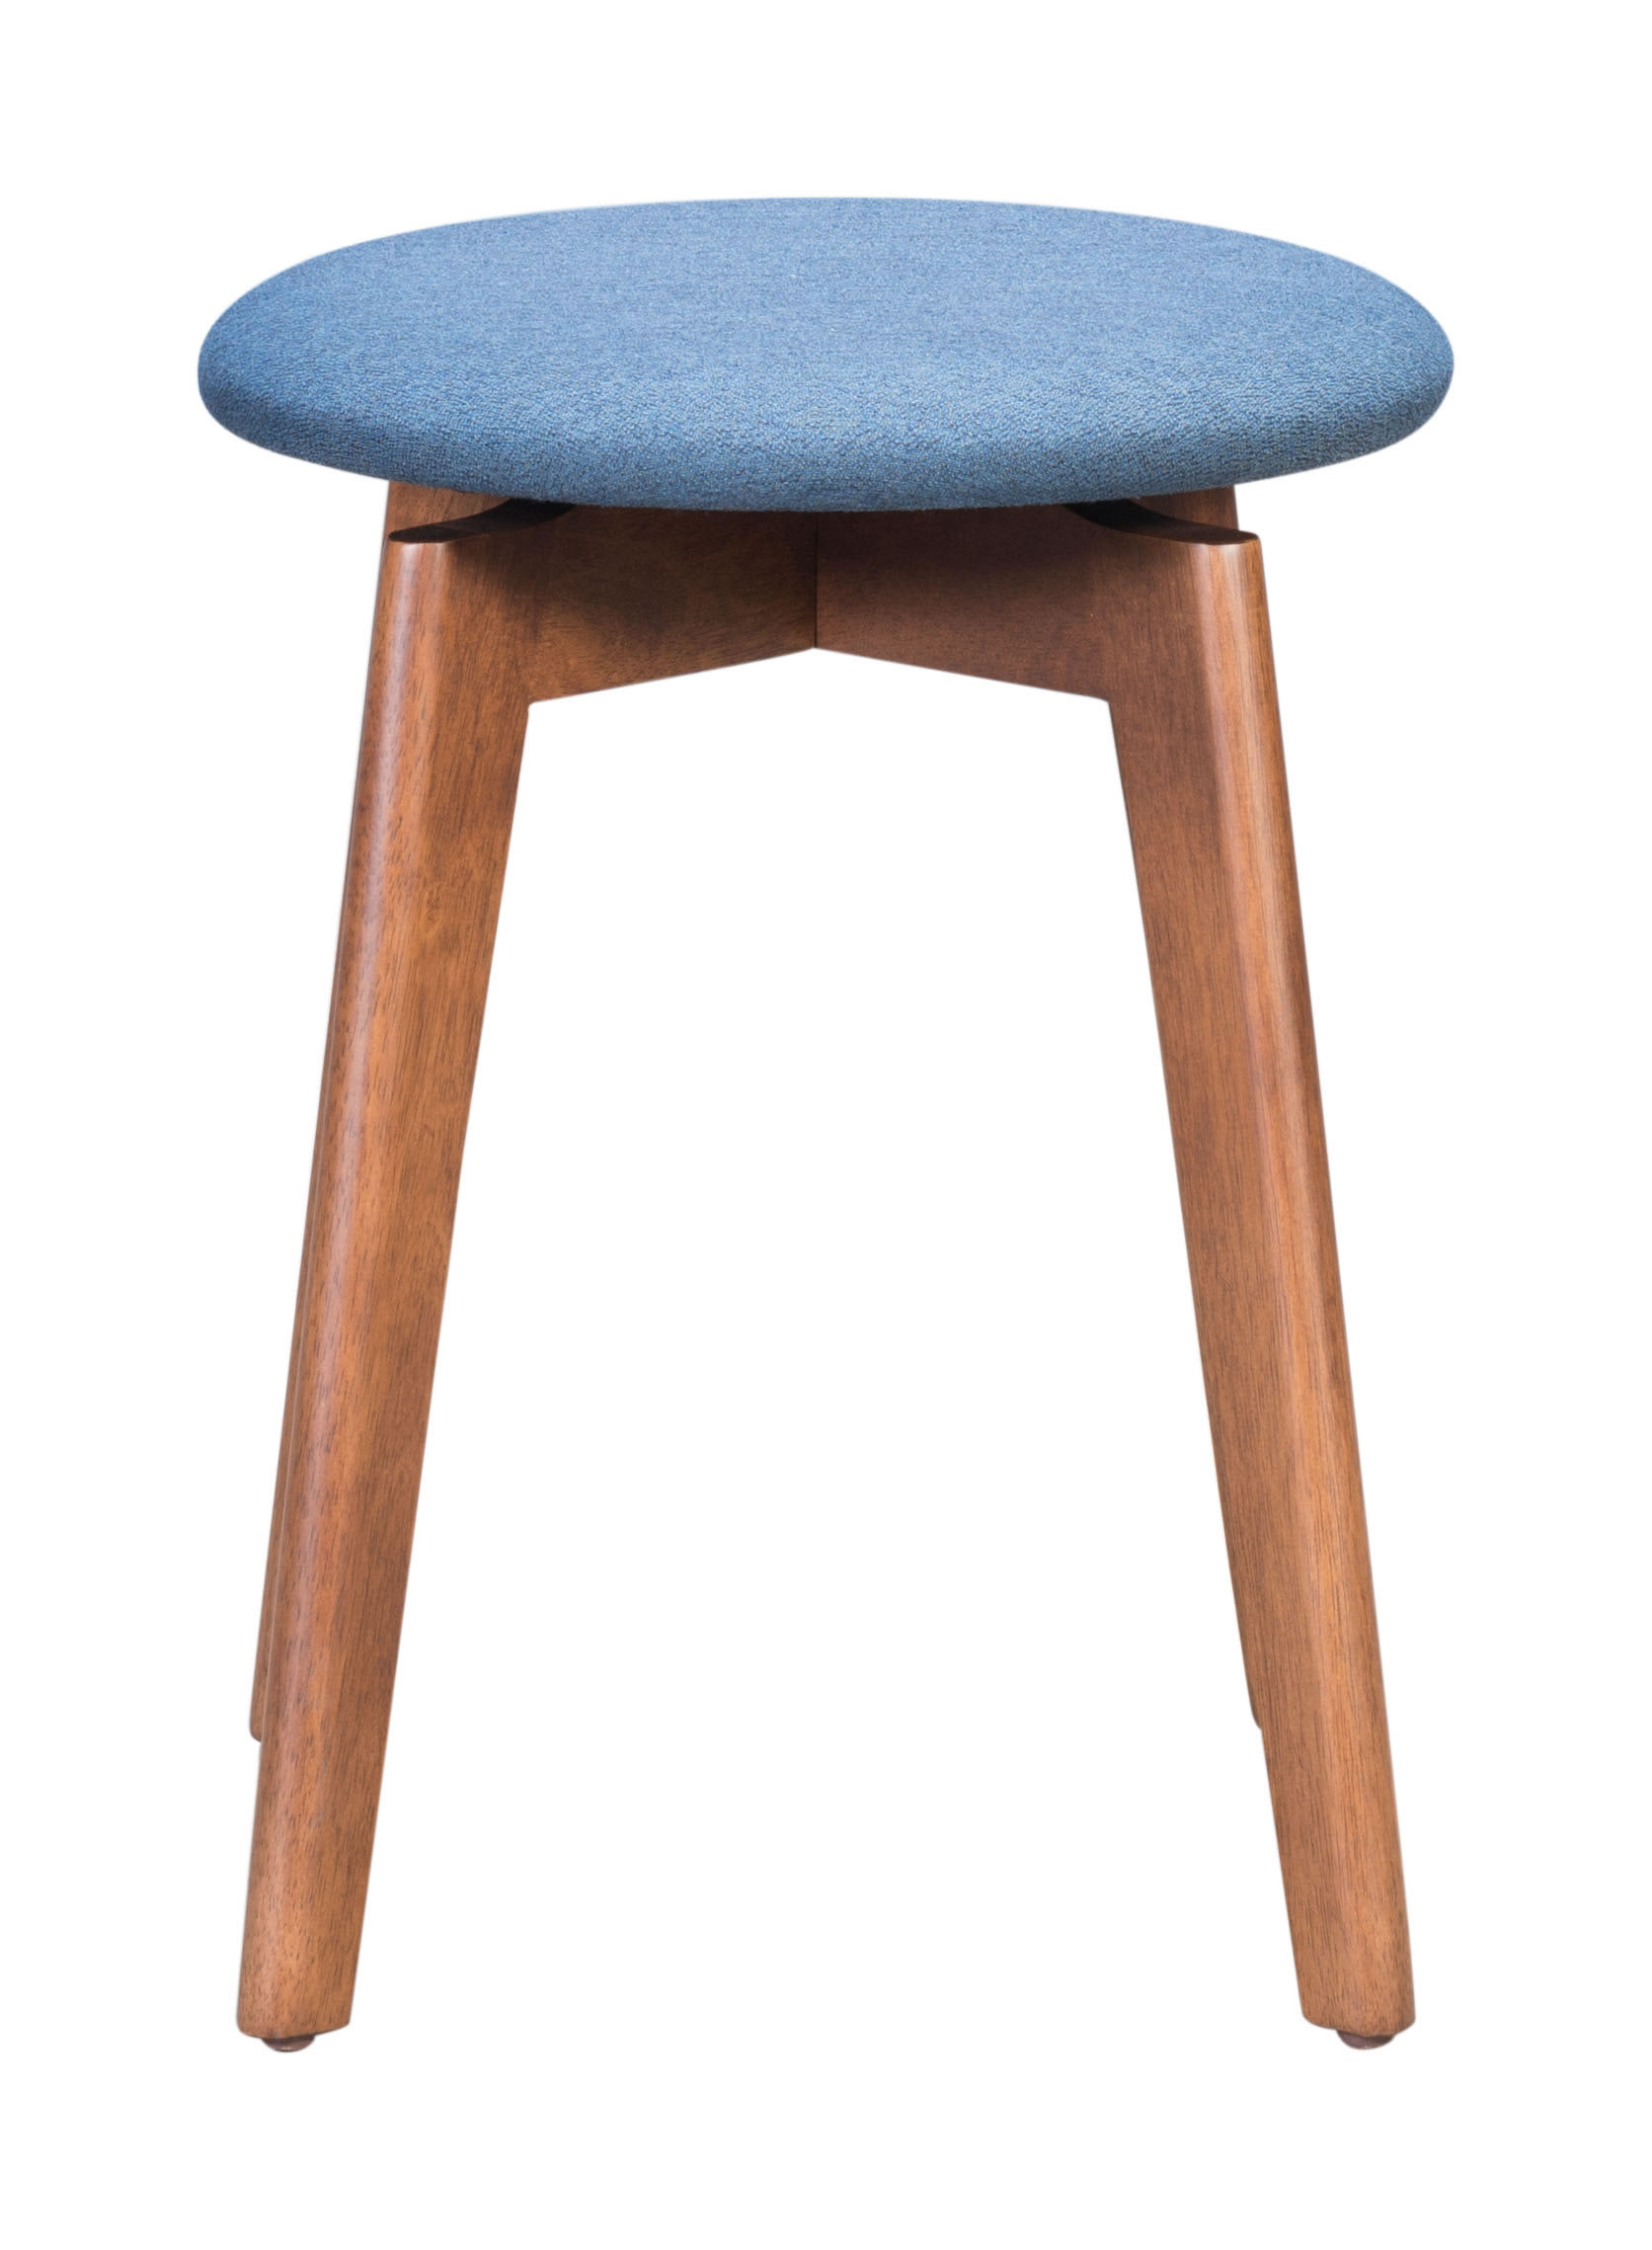 14.4" x 14.4" x 19.3" Walnut and Ink Blue Poly Linen MDF Rubber Wood Stool Set of 2